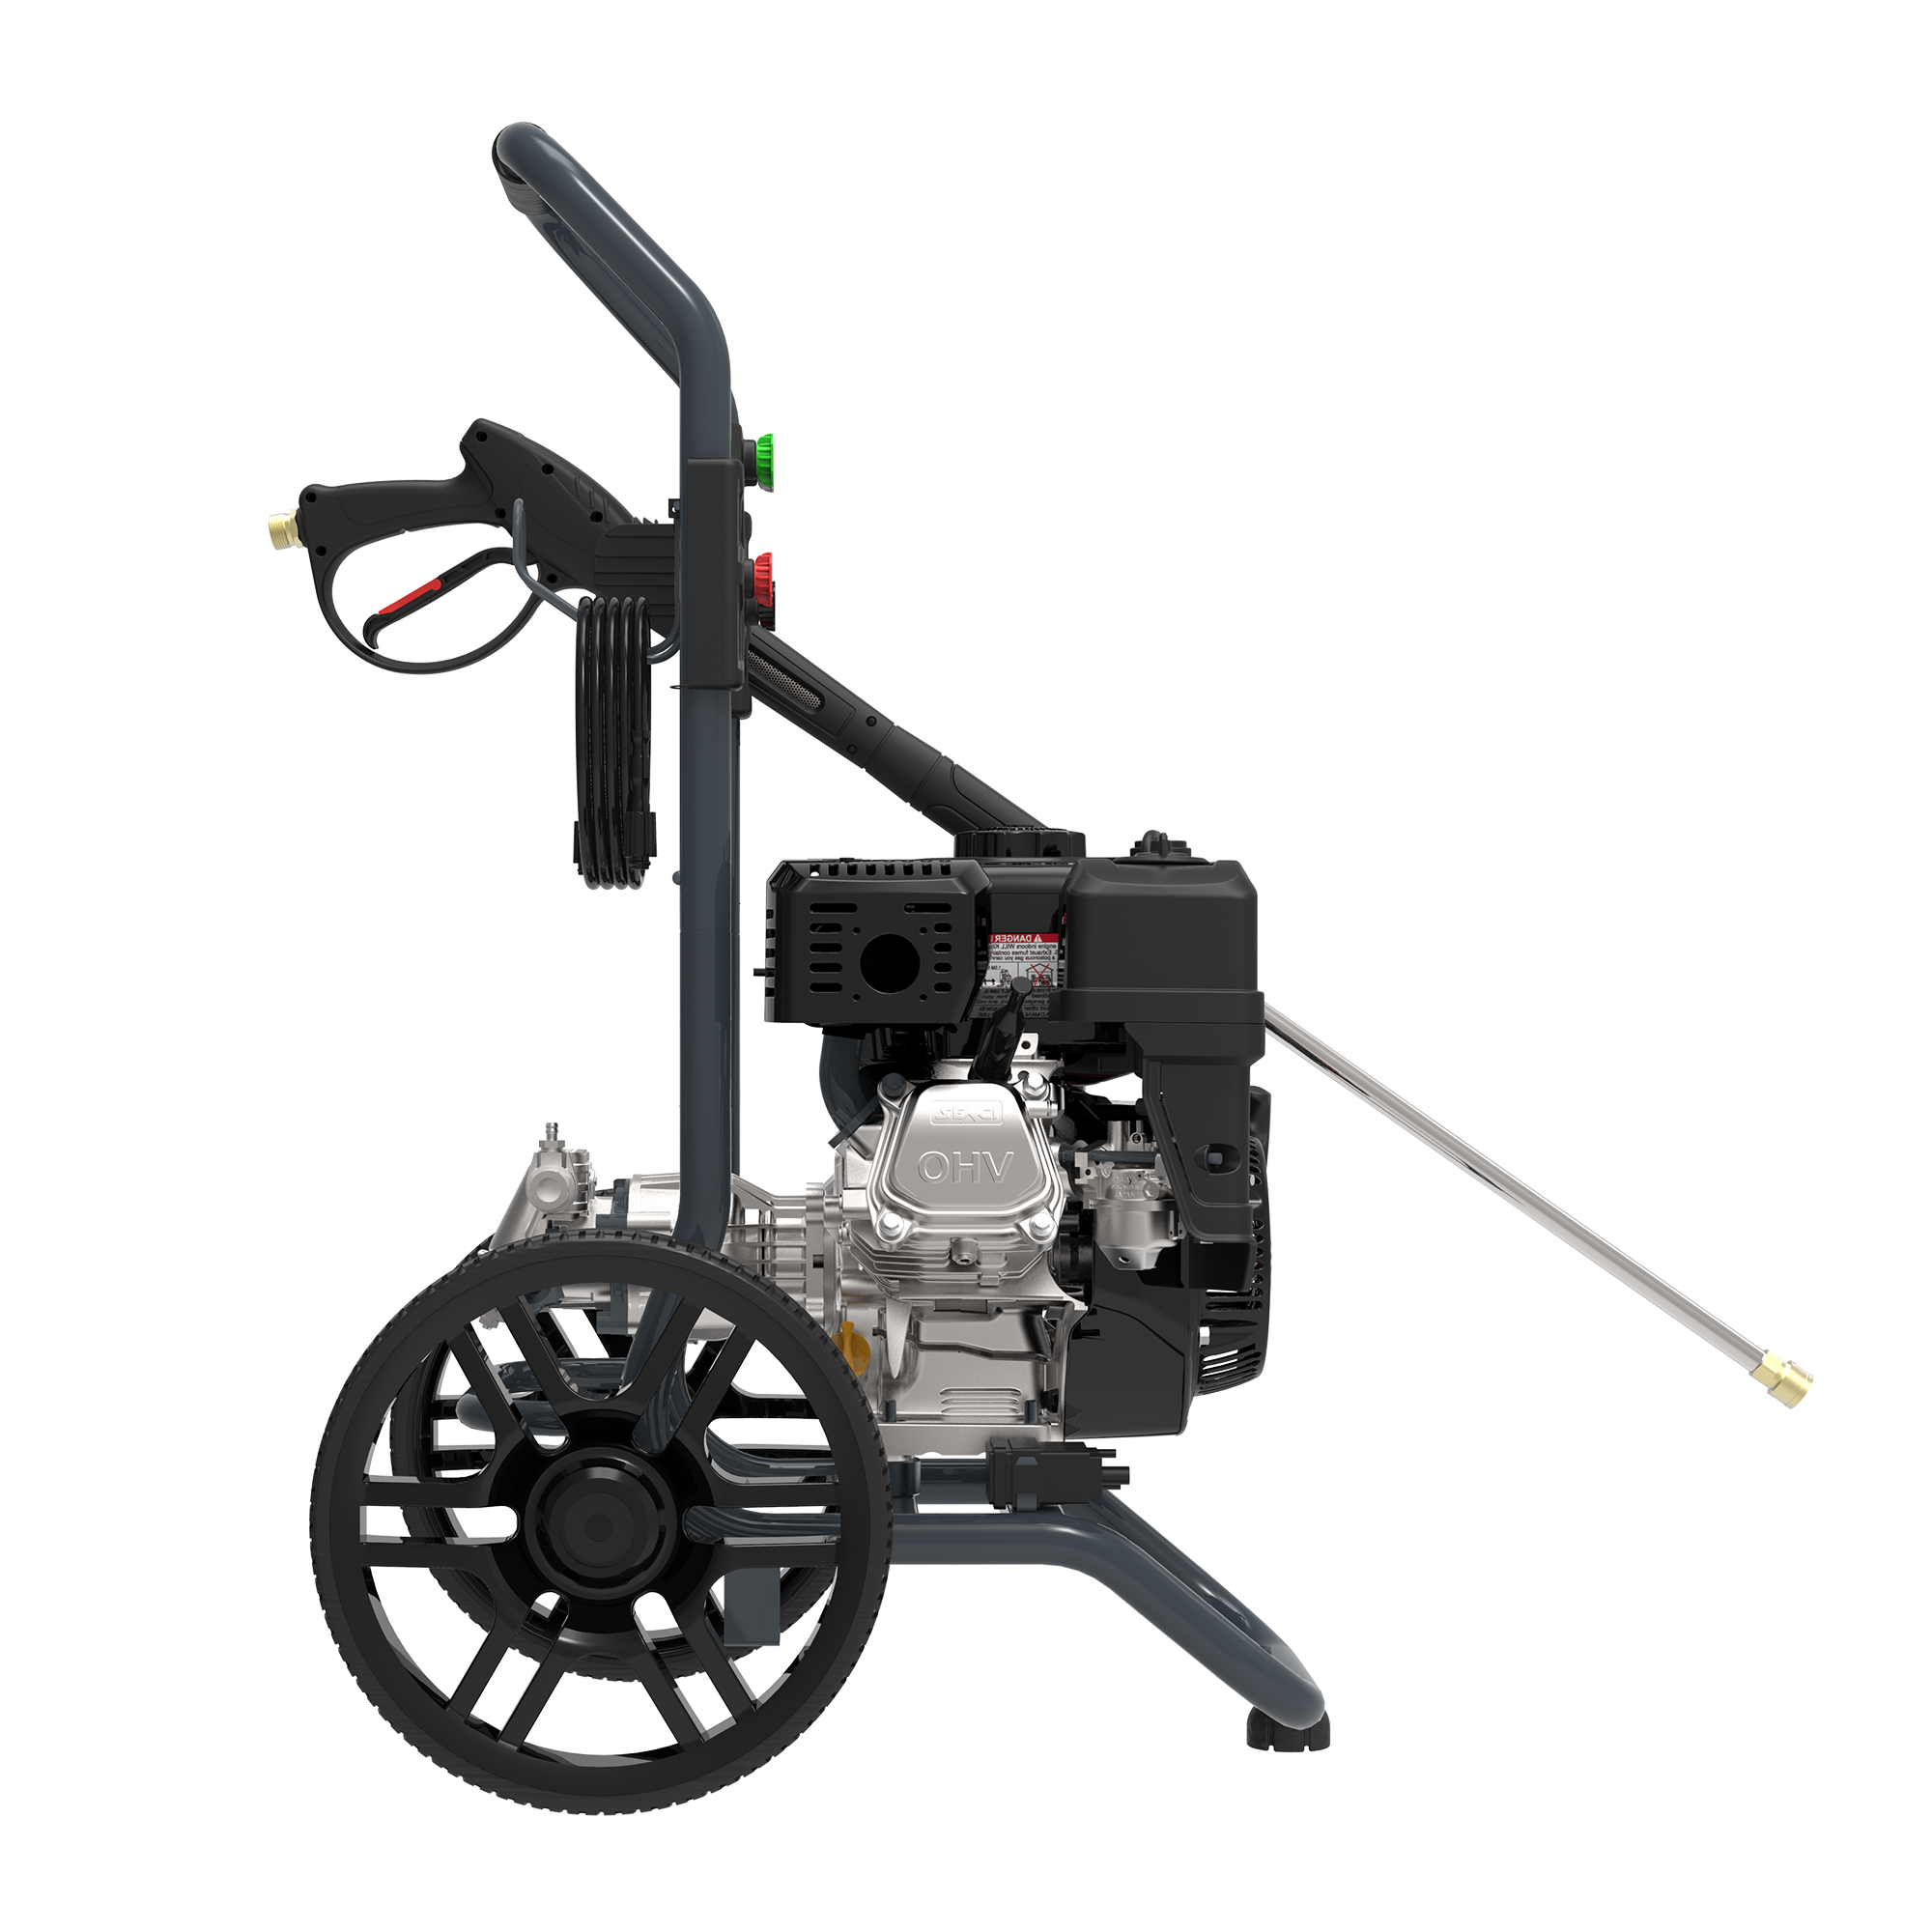 PWF2701SH - Gas Powered<br> Pressure Washer